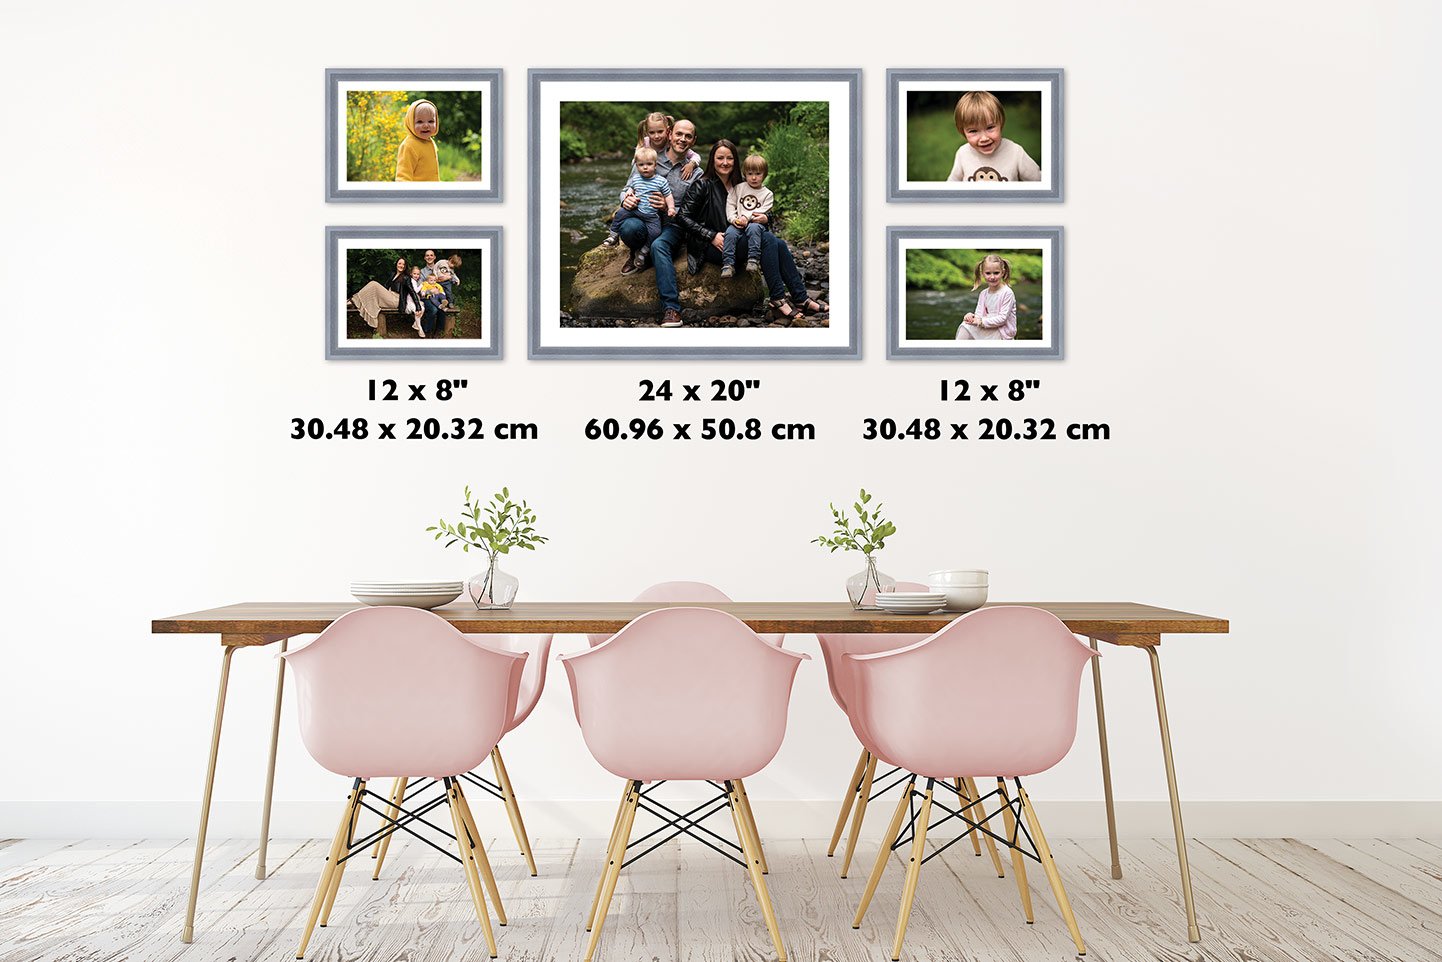 Frame and Photo Sizes from Inches to cm